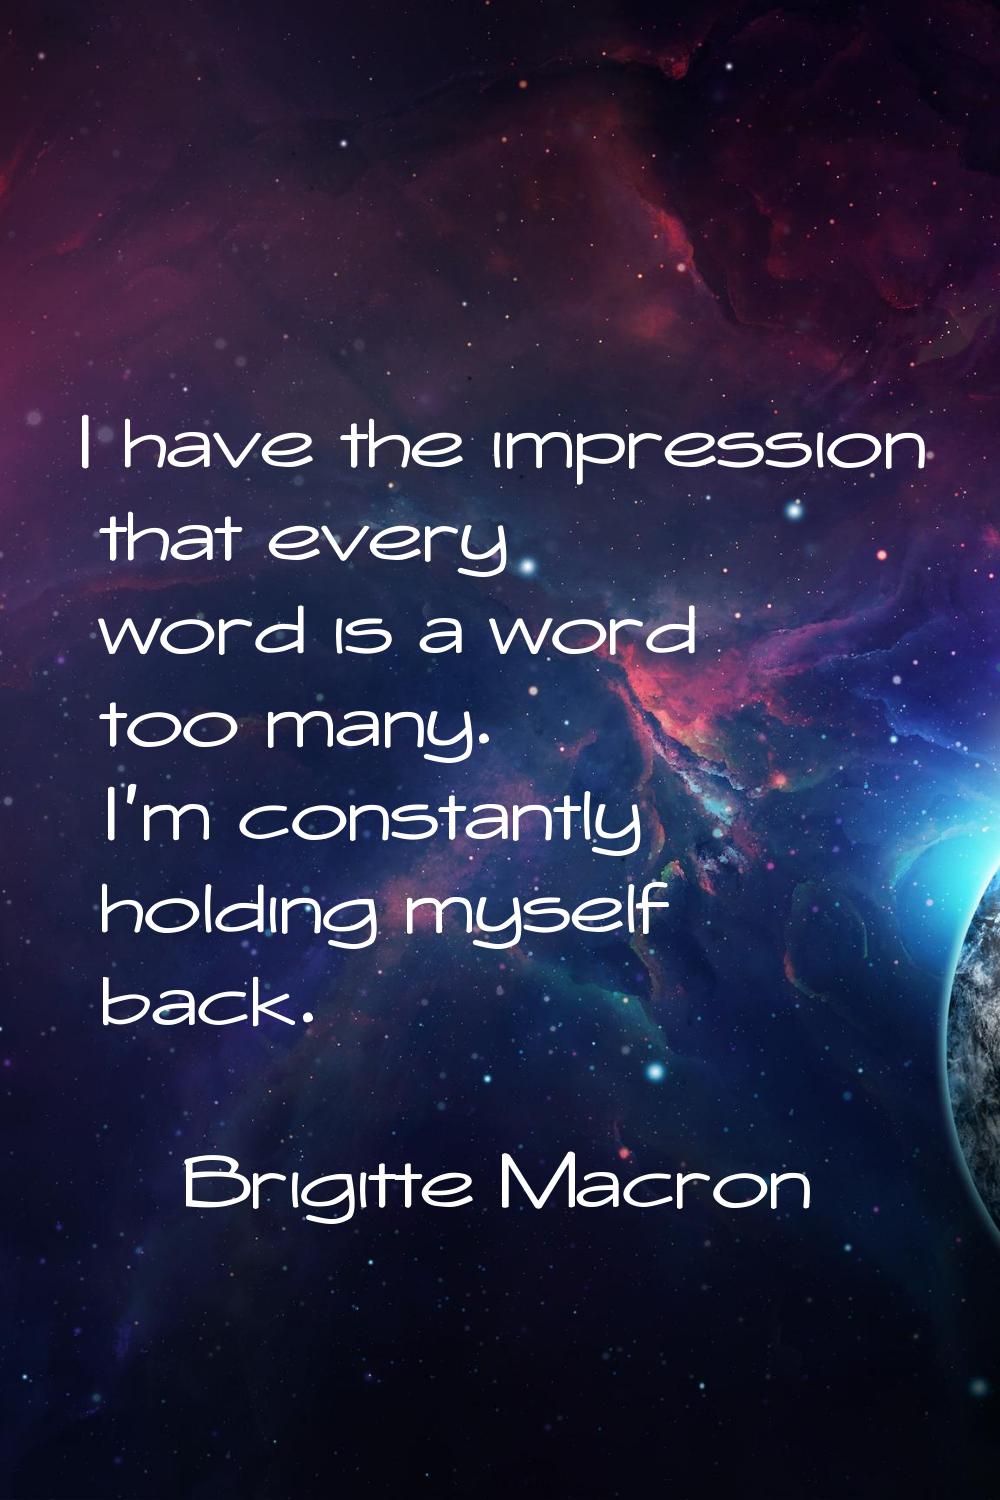 I have the impression that every word is a word too many. I'm constantly holding myself back.